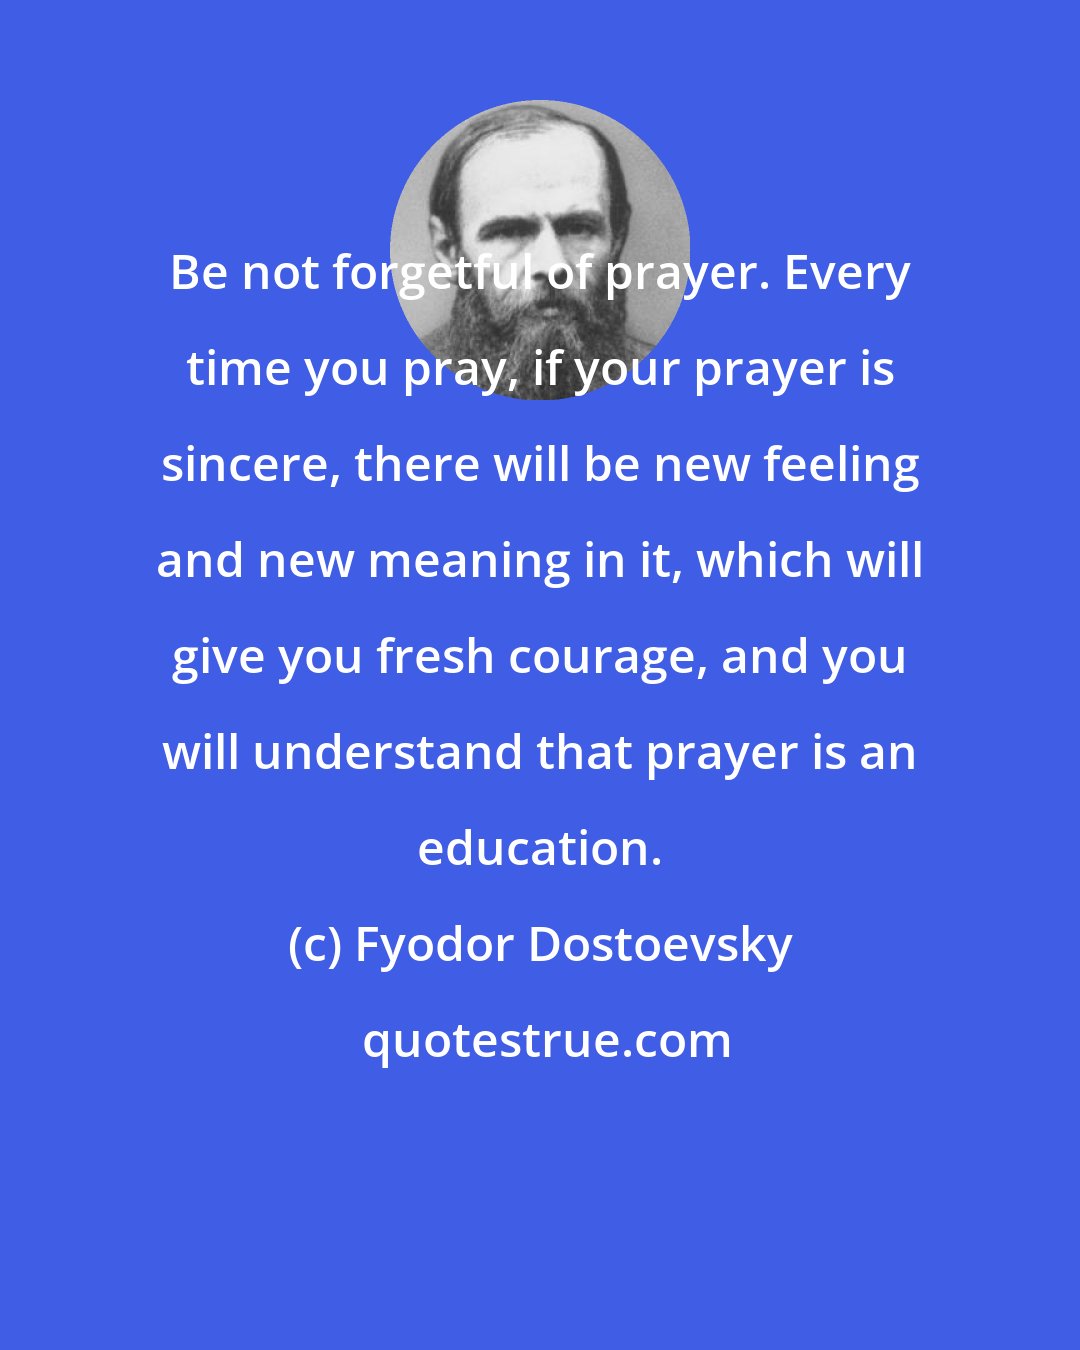 Fyodor Dostoevsky: Be not forgetful of prayer. Every time you pray, if your prayer is sincere, there will be new feeling and new meaning in it, which will give you fresh courage, and you will understand that prayer is an education.